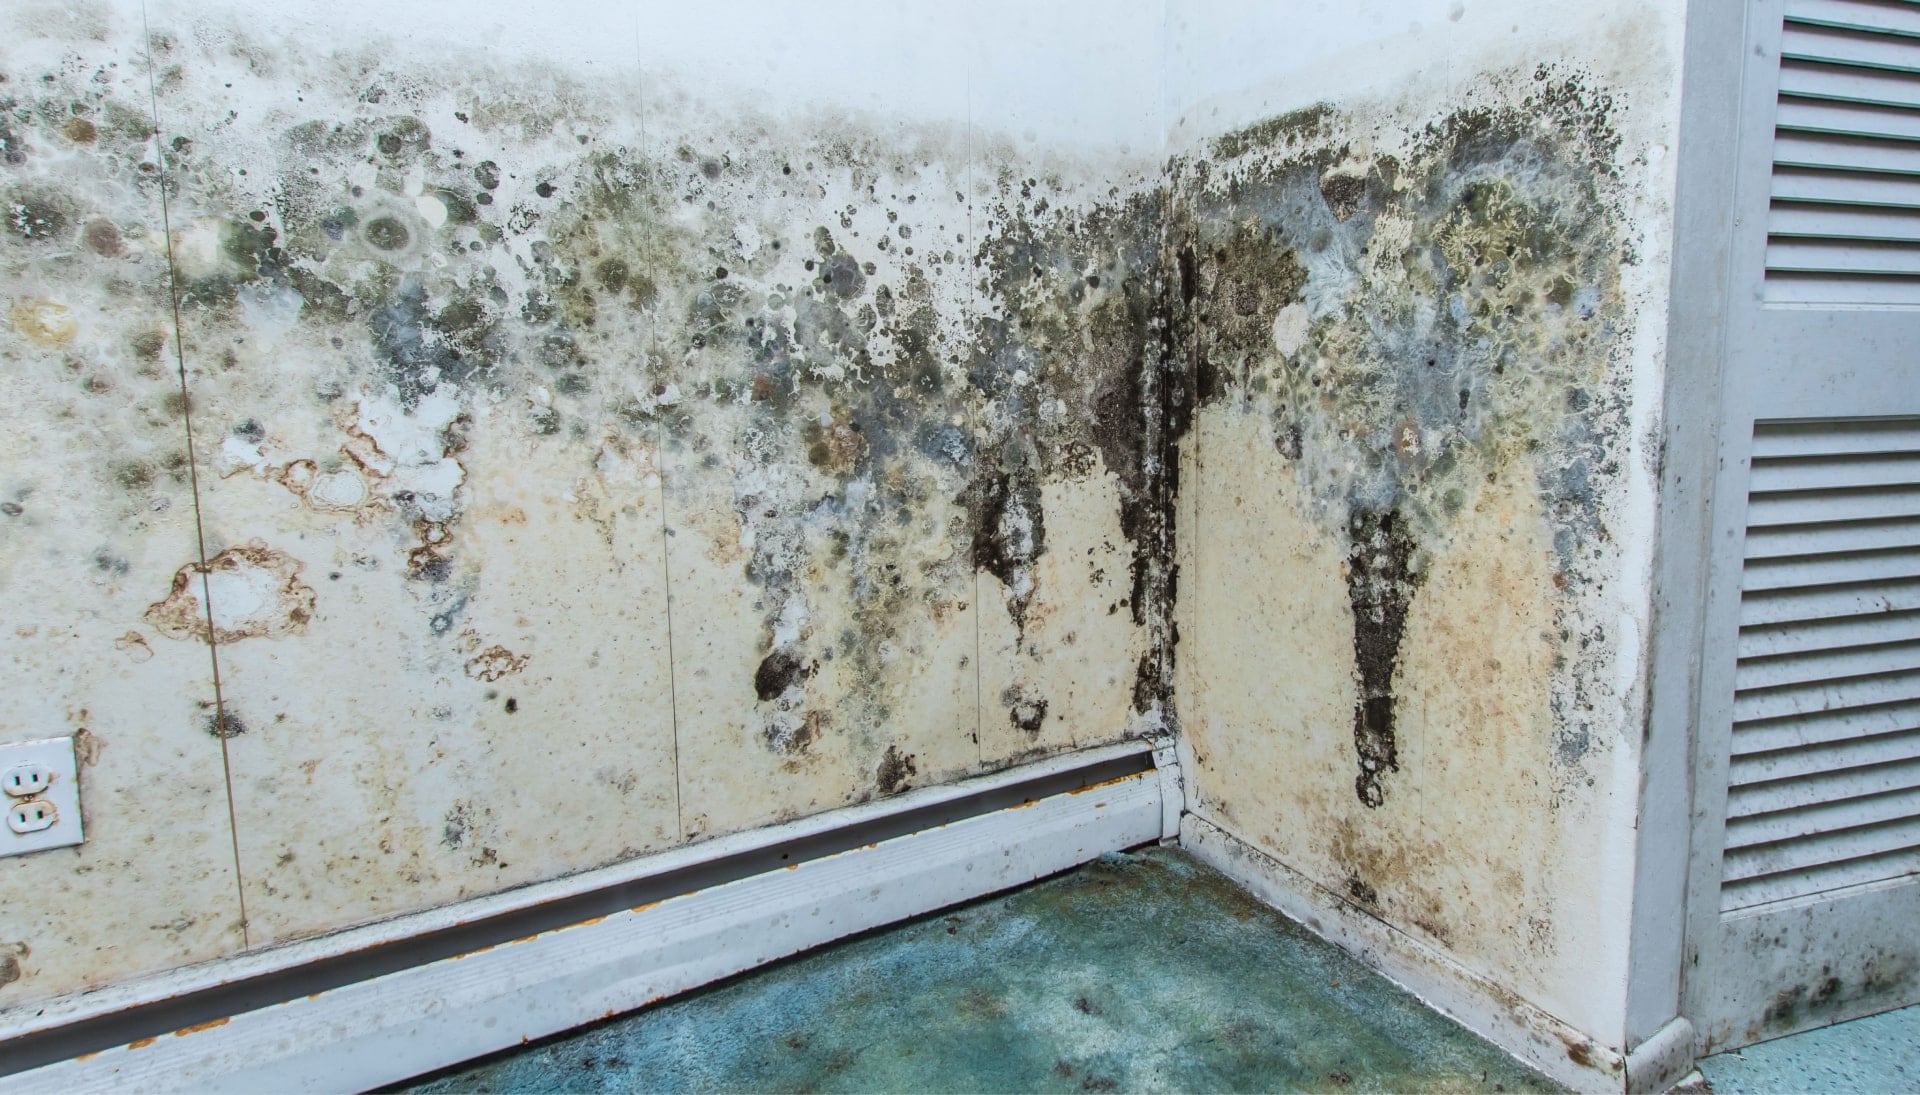 Professional mold removal, odor control, and water damage restoration service in Cleveland, Ohio.